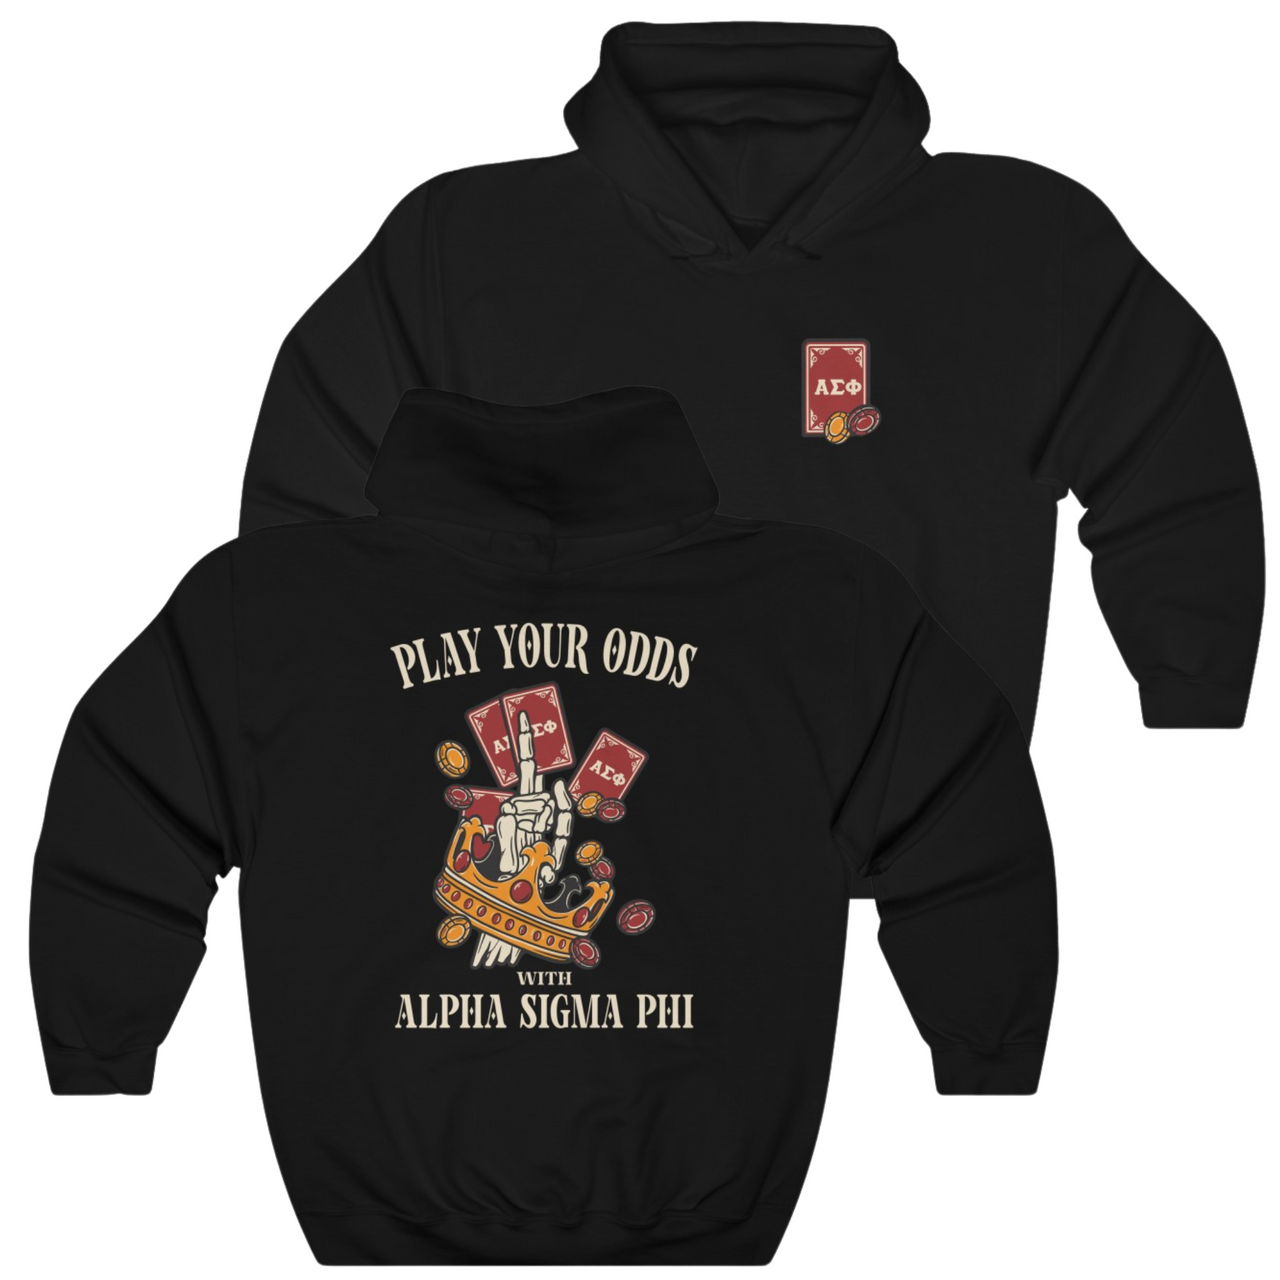 Black Alpha Sigma Phi Graphic Hoodie | Play Your Odds | Alpha Sigma Phi Fraternity Hoodie 